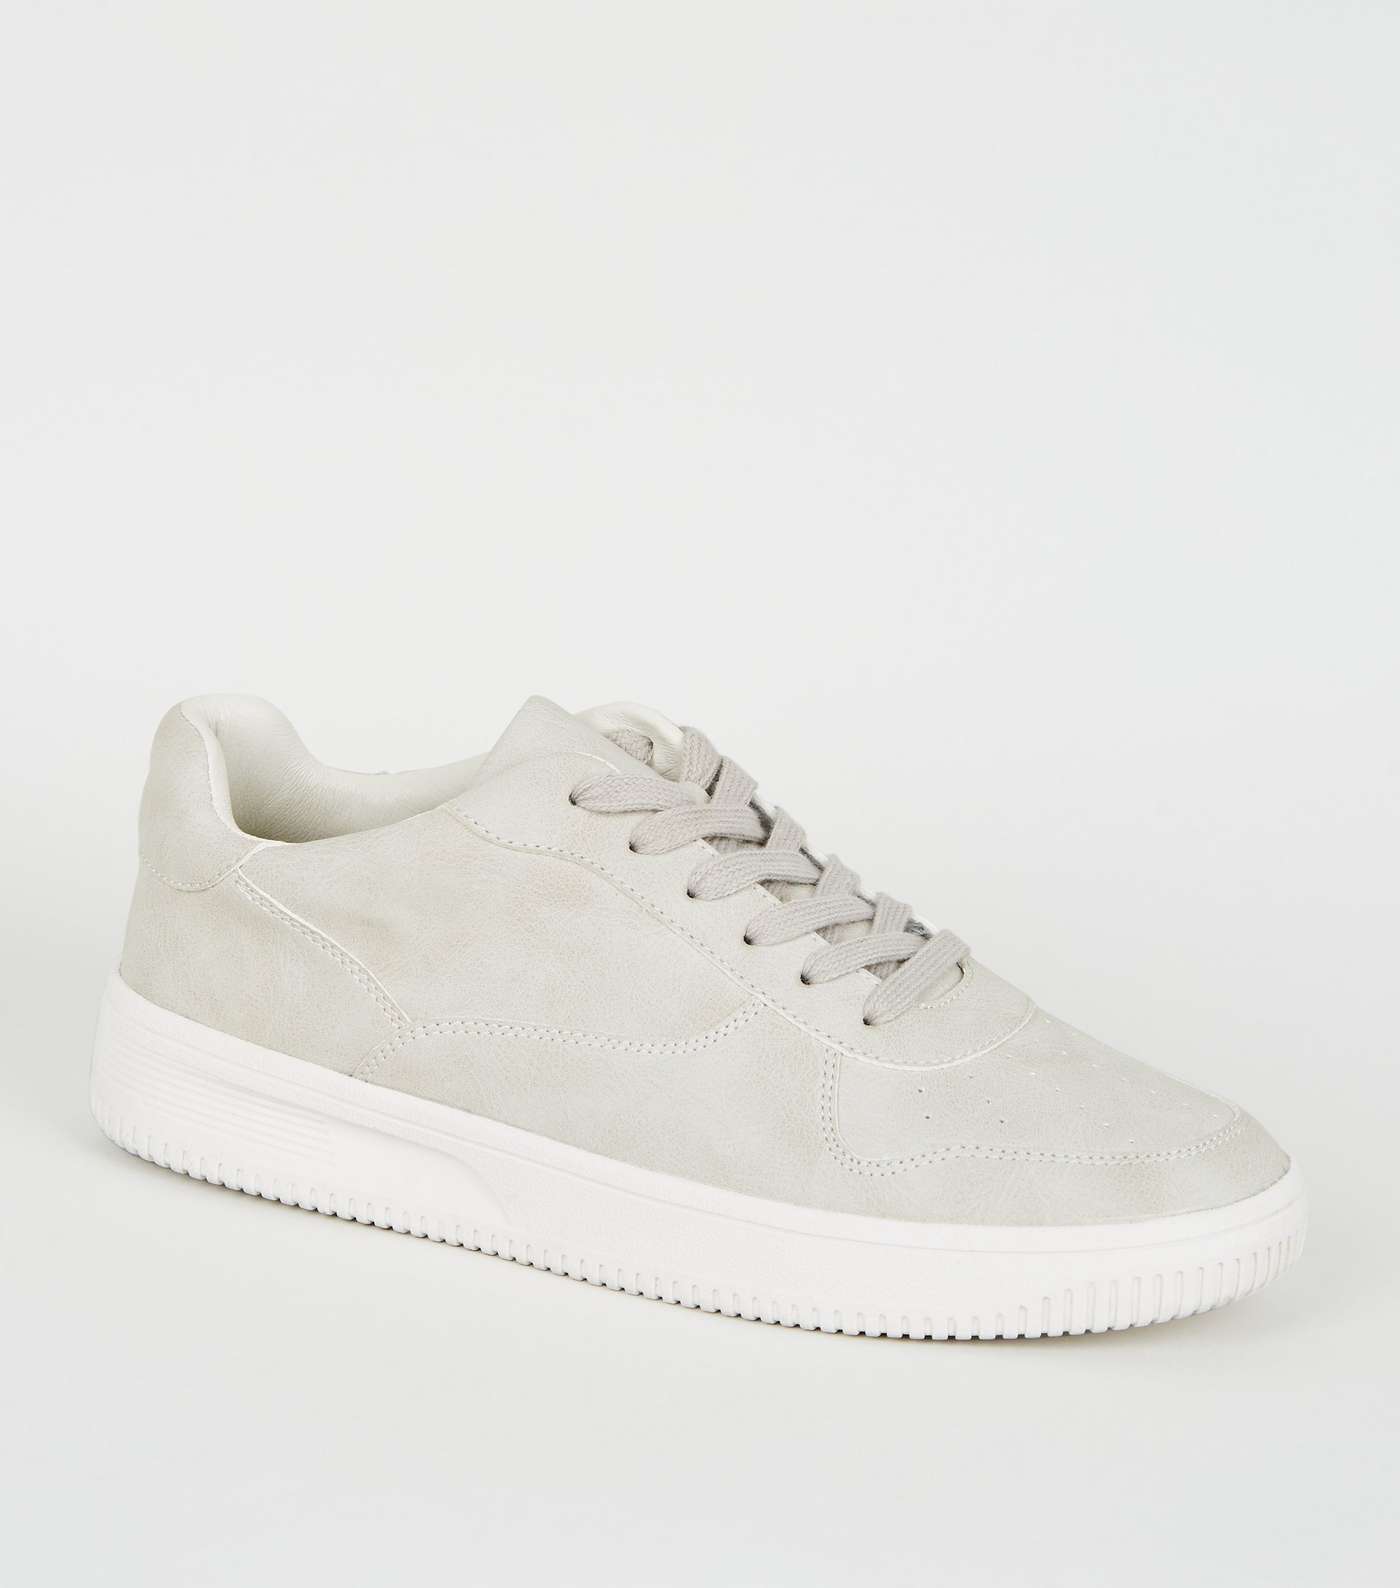 Grey Leather-Look Lace-Up Trainers